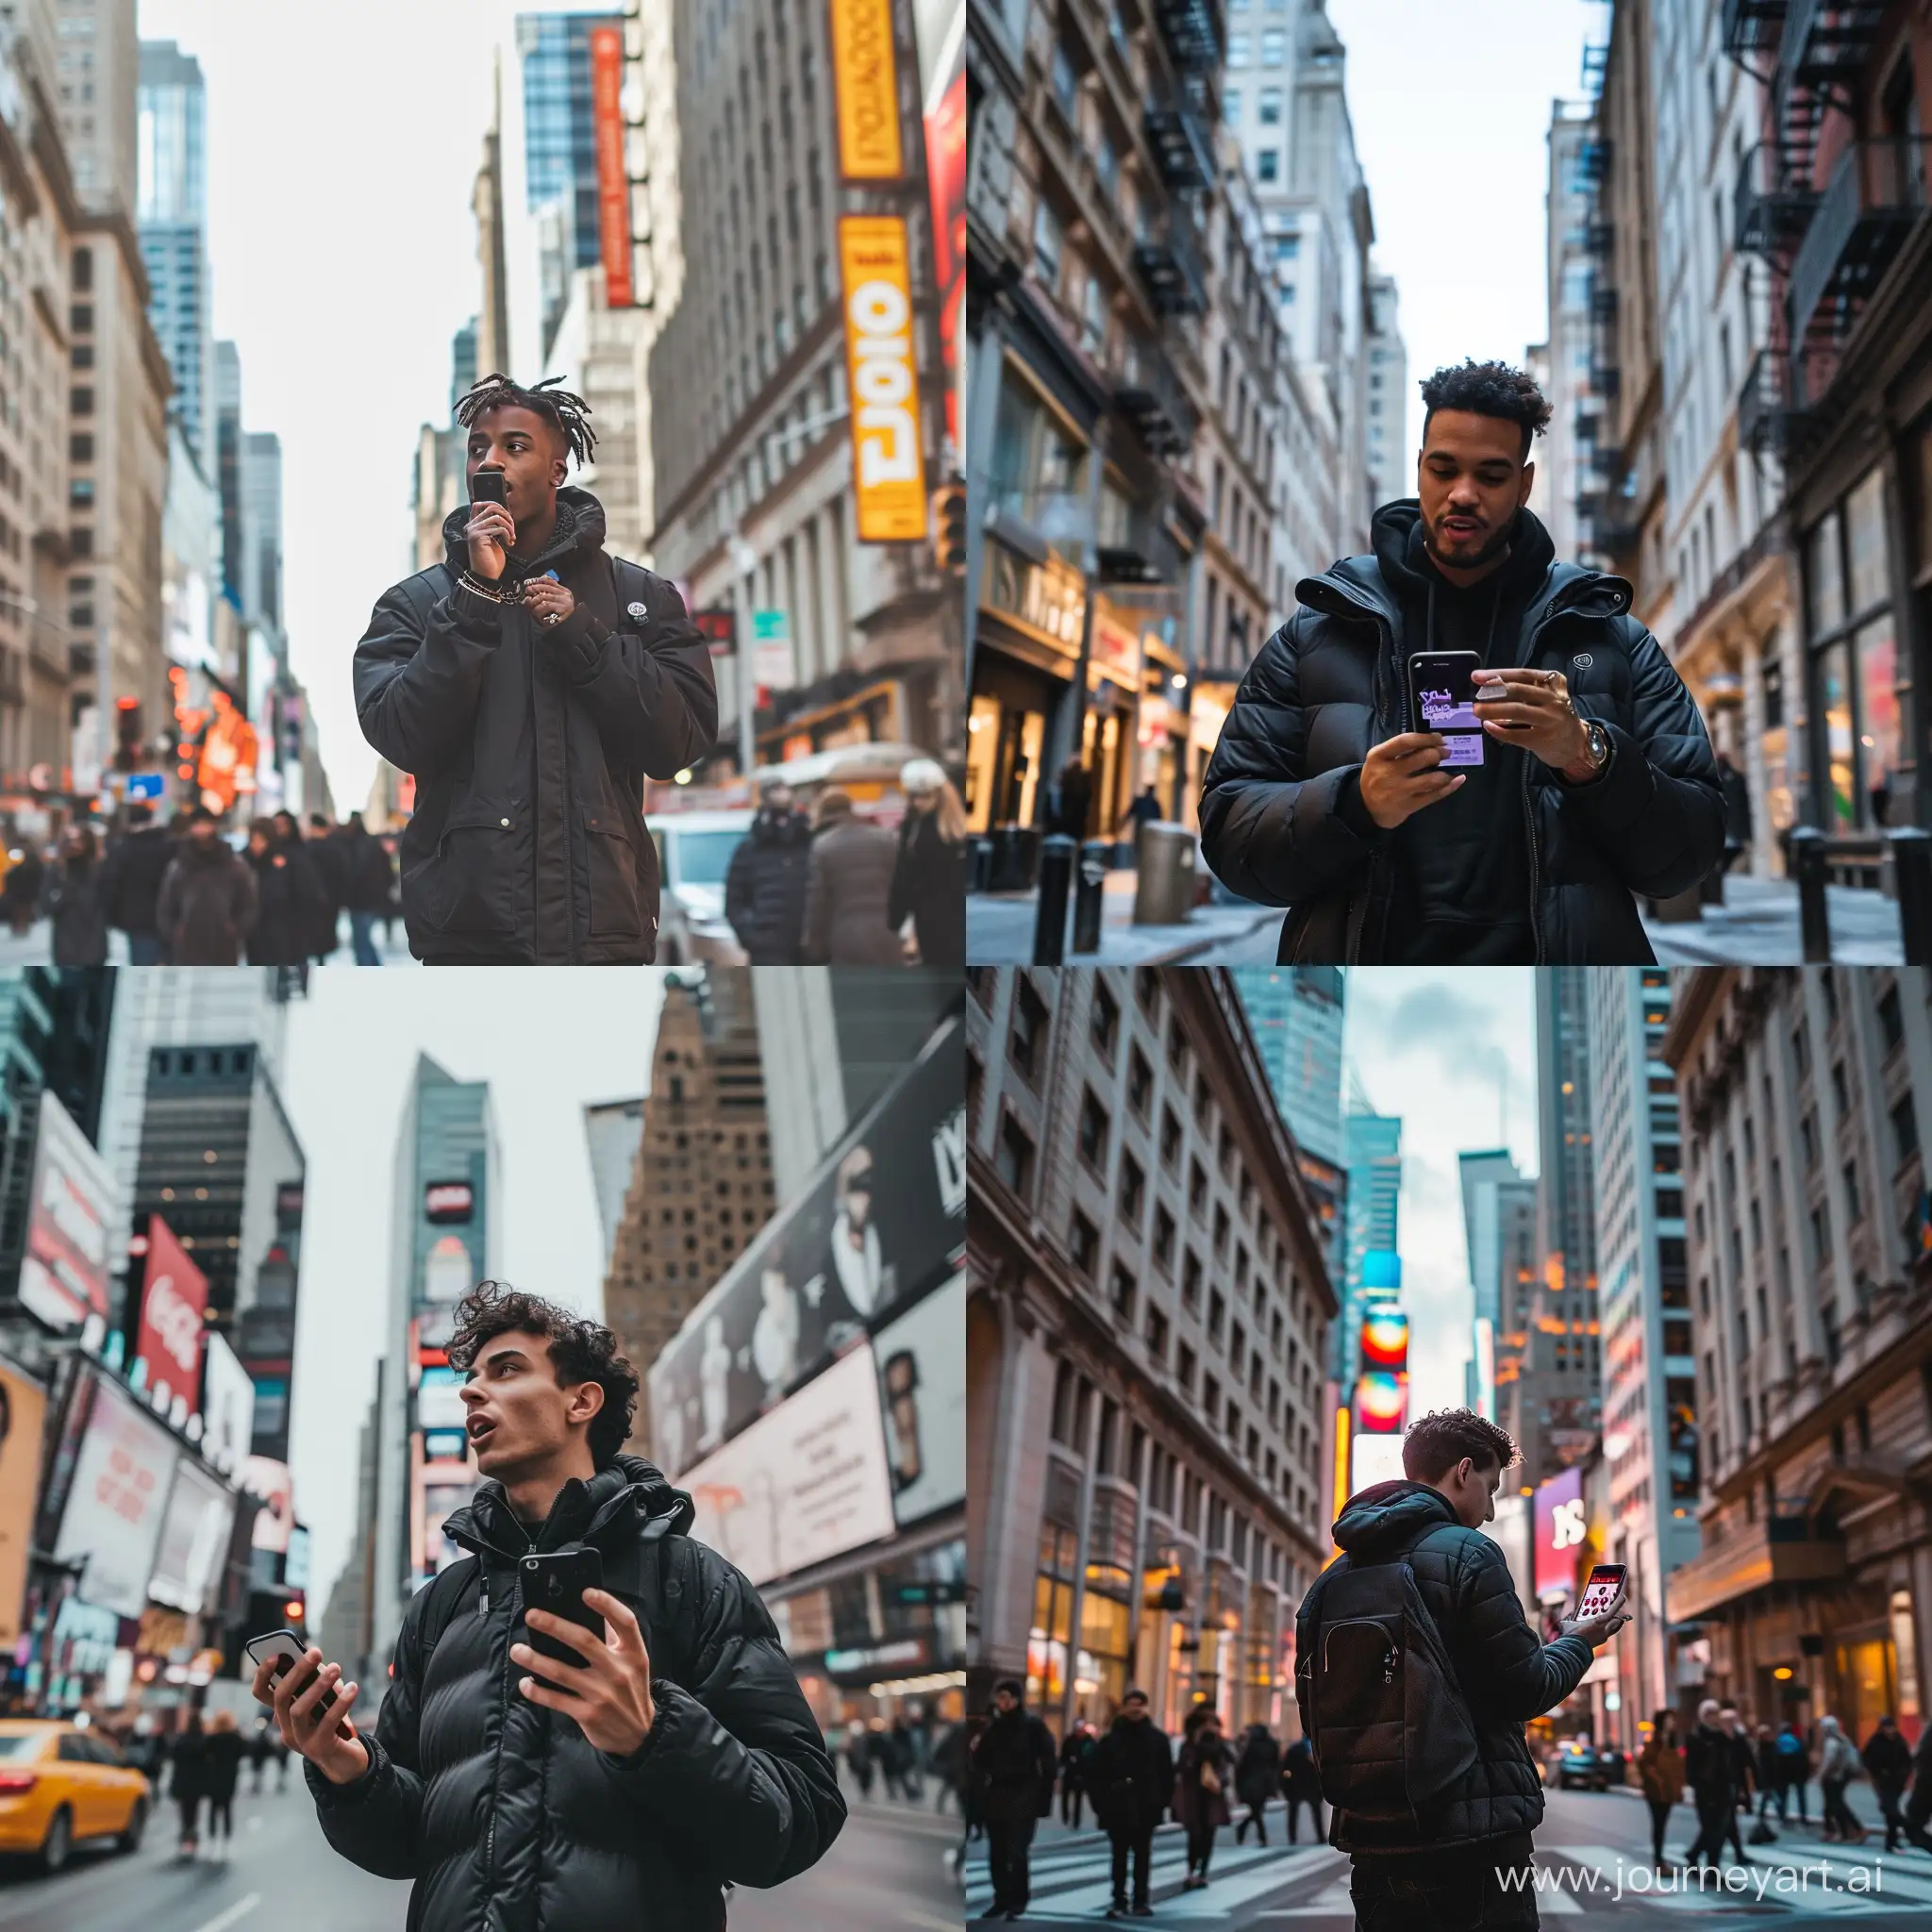 Man-Sending-a-Voice-on-Instagram-Direct-in-Urban-Setting